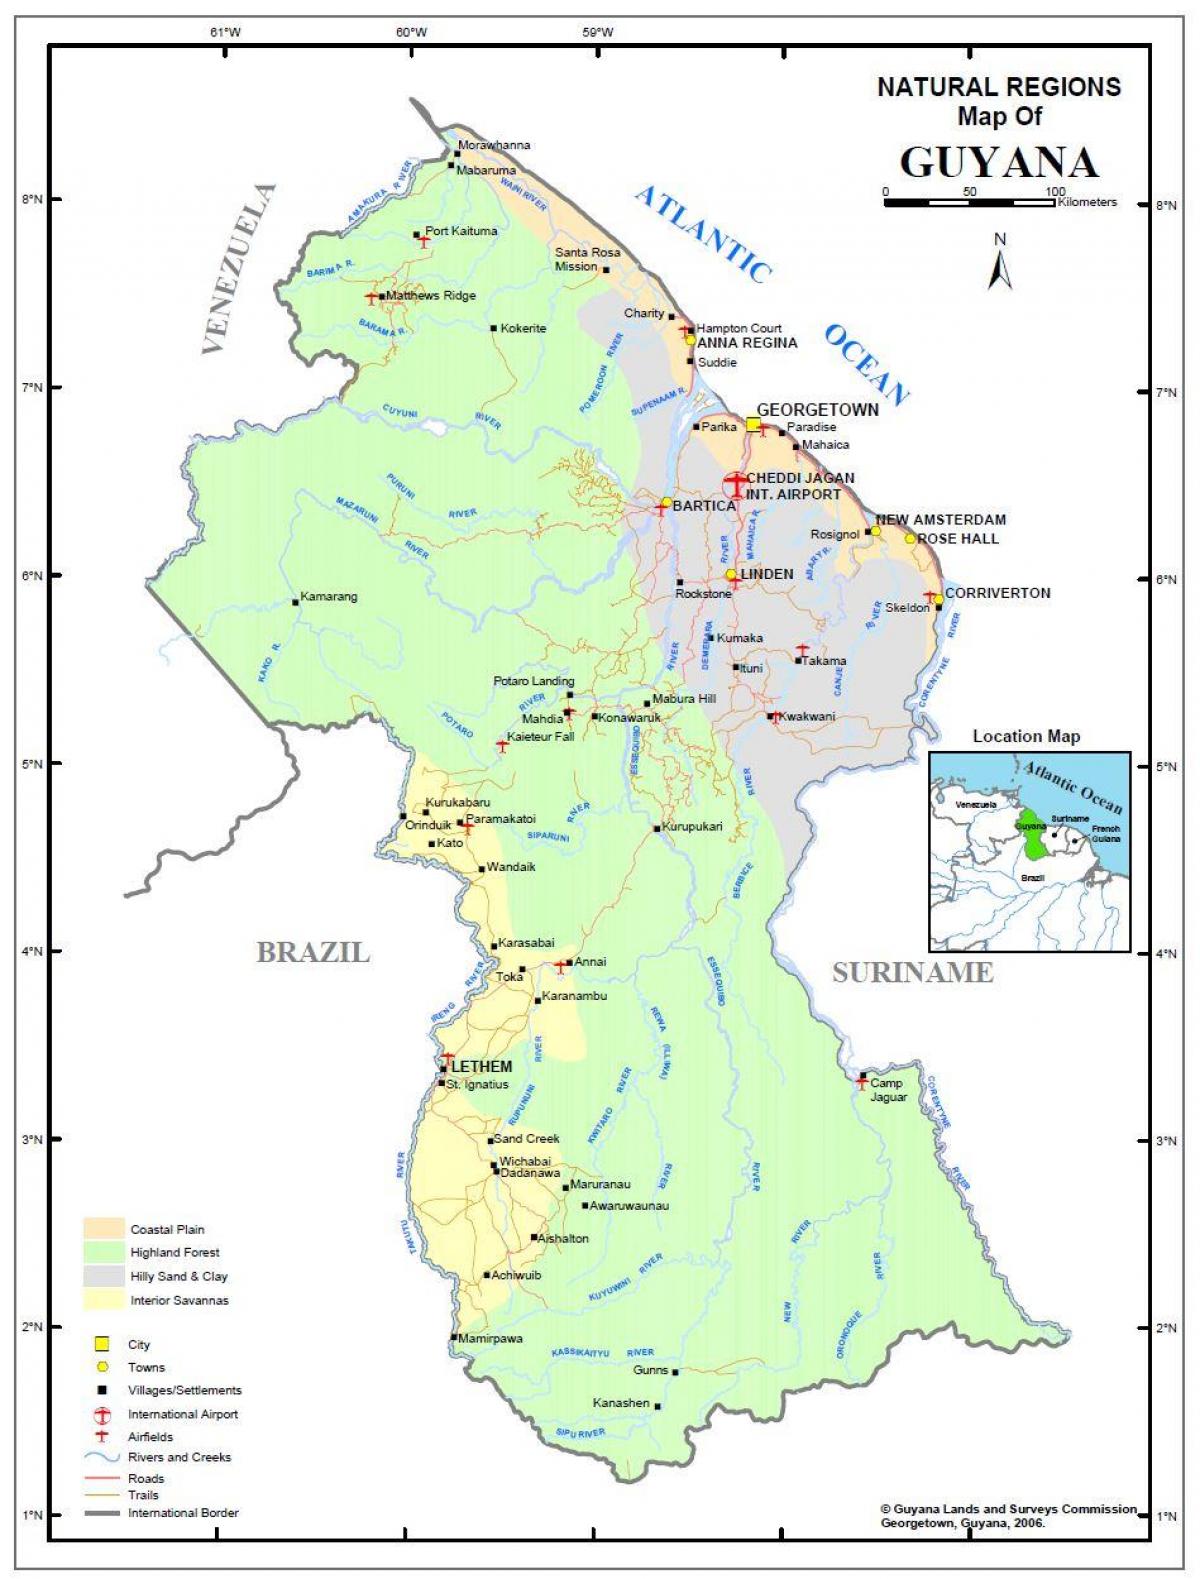 map of Guyana showing the 4 natural regions